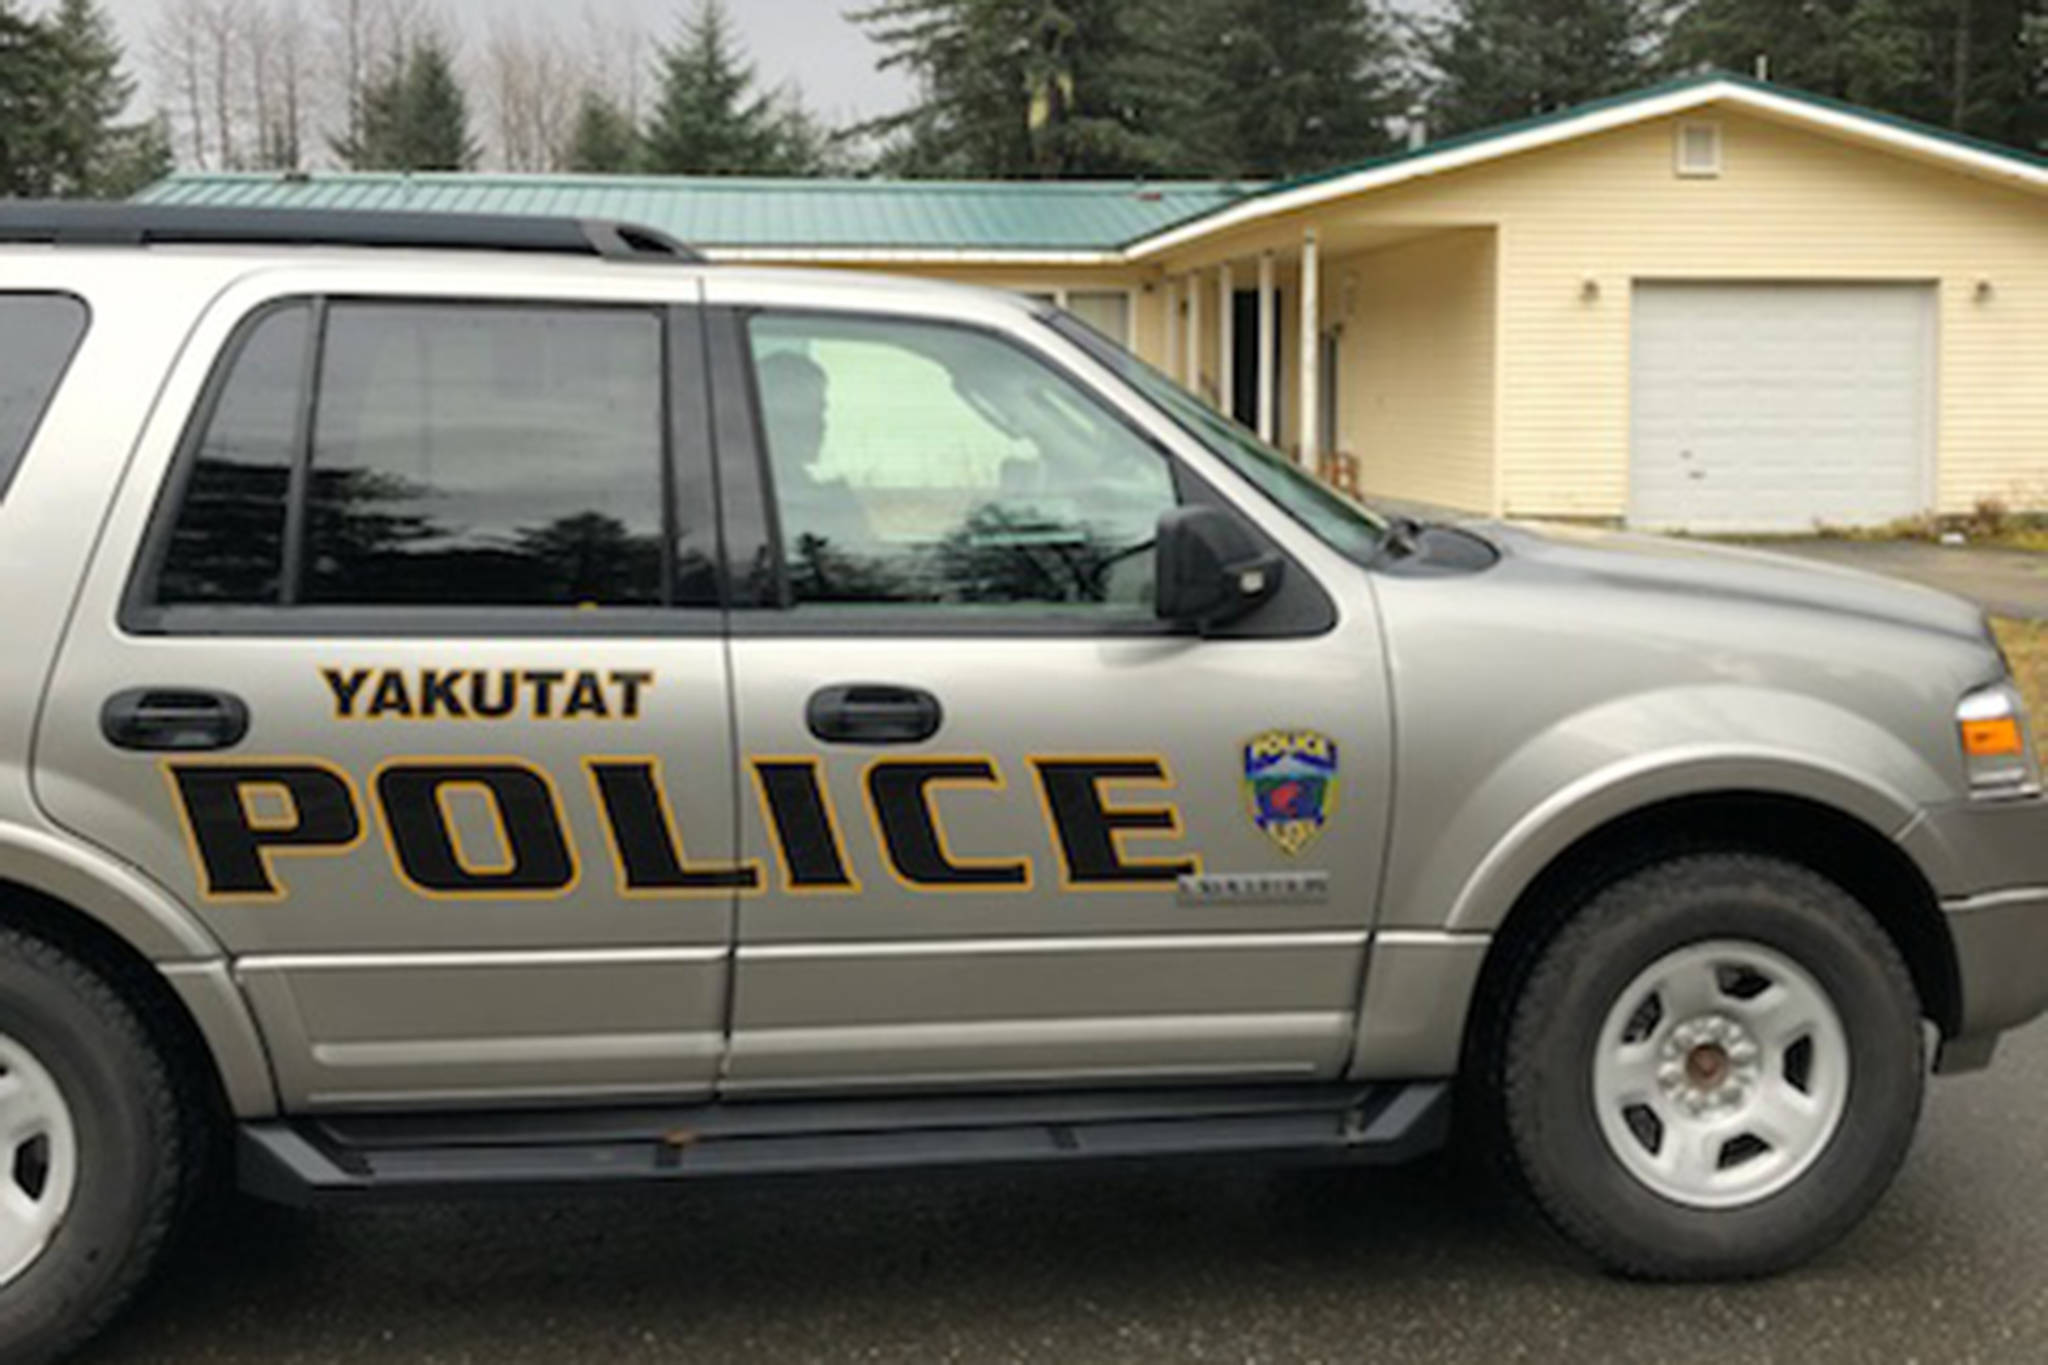 A Yakutat Borough Police Department vehicle sits in front of the site of a fatal stabbing in Yakutat on Sunday, Oct. 14, 2018. (Courtesy Photo | Yakutat Borough Police Department)